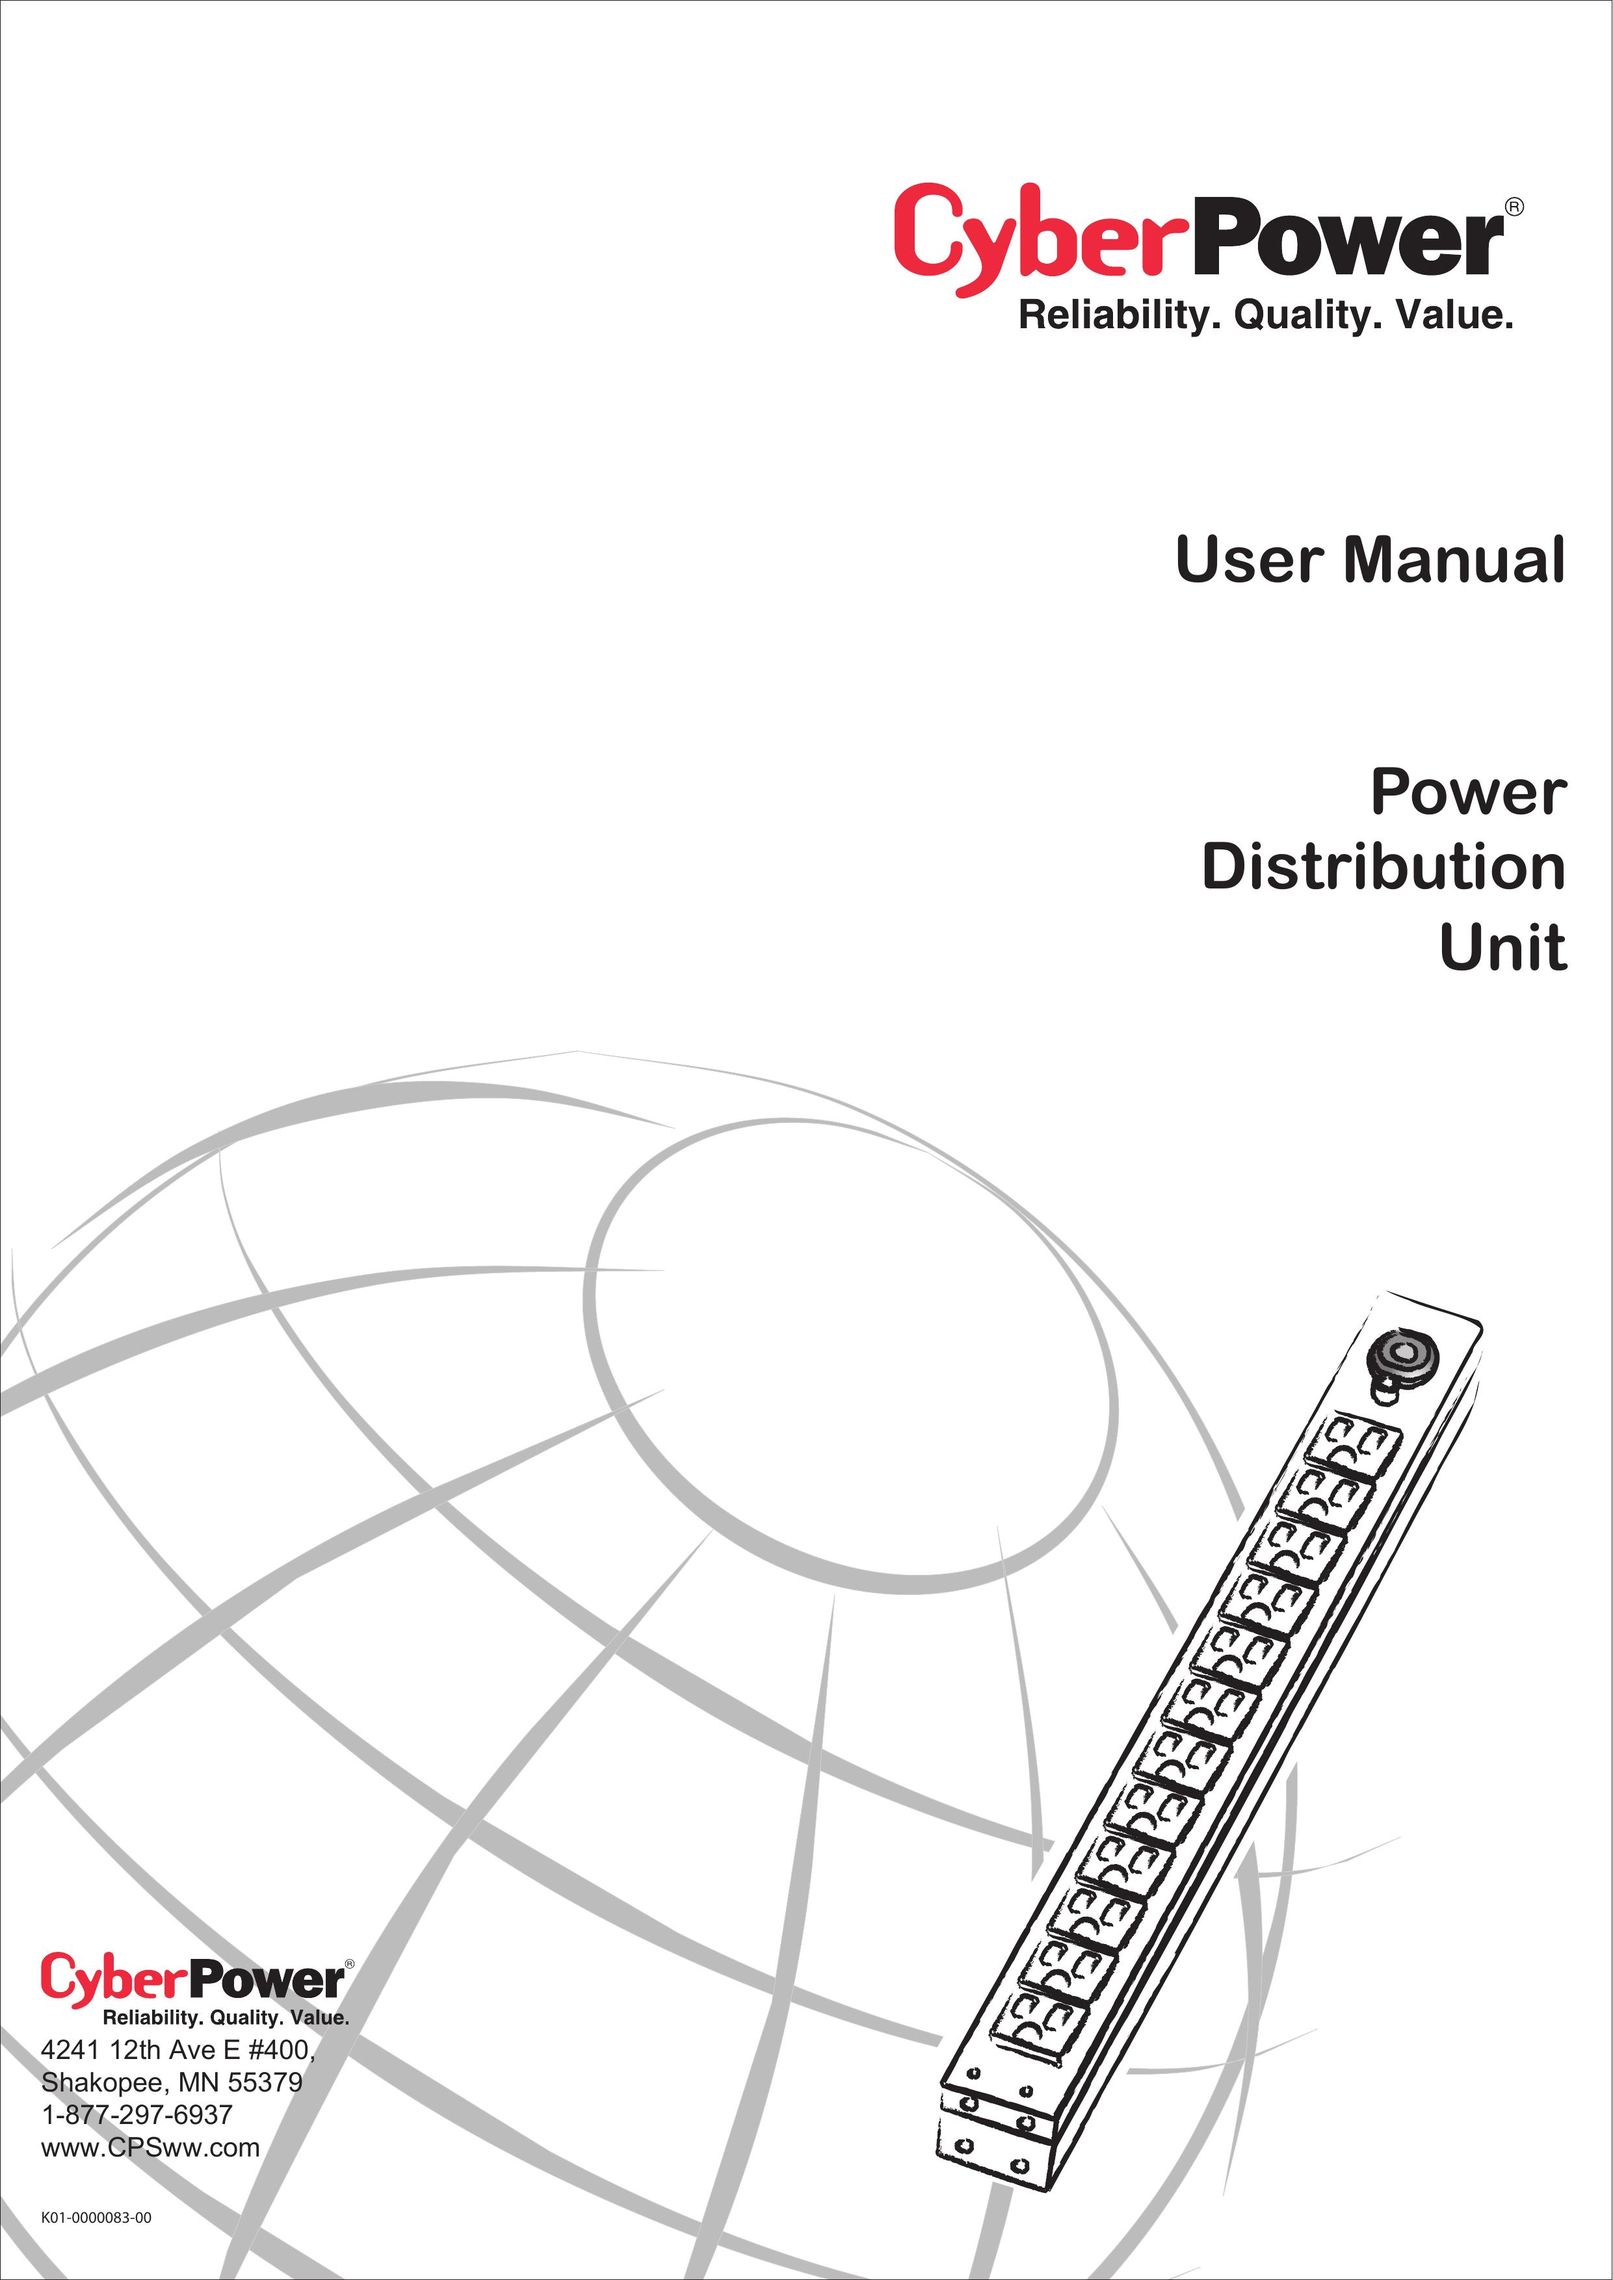 CyberPower K01-0000083-00 Surge Protector User Manual